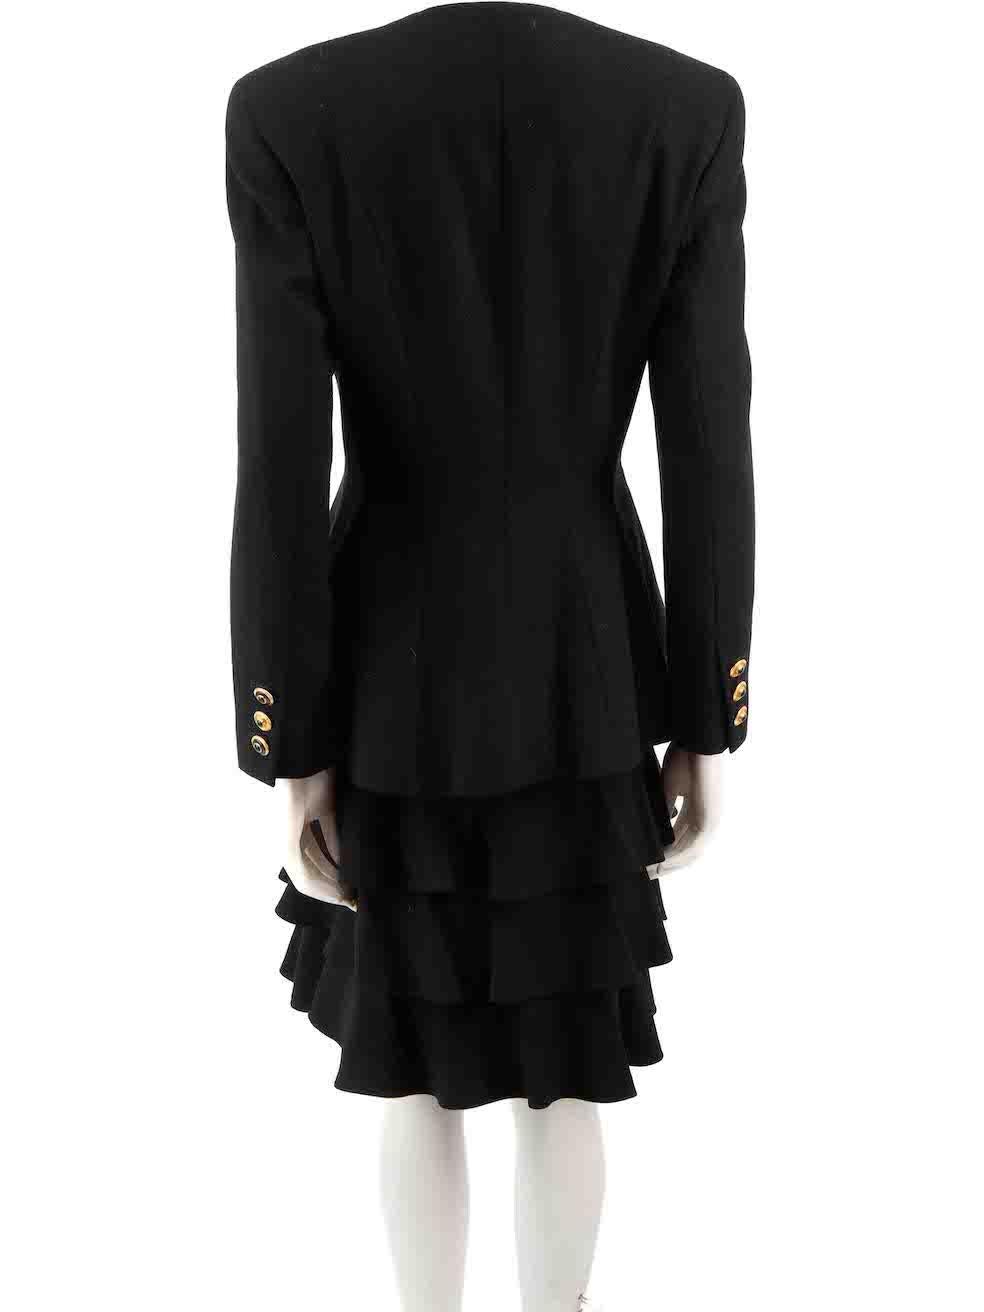 Escada Black Wool Jacket & Skirt Matching Set Size M In Good Condition For Sale In London, GB